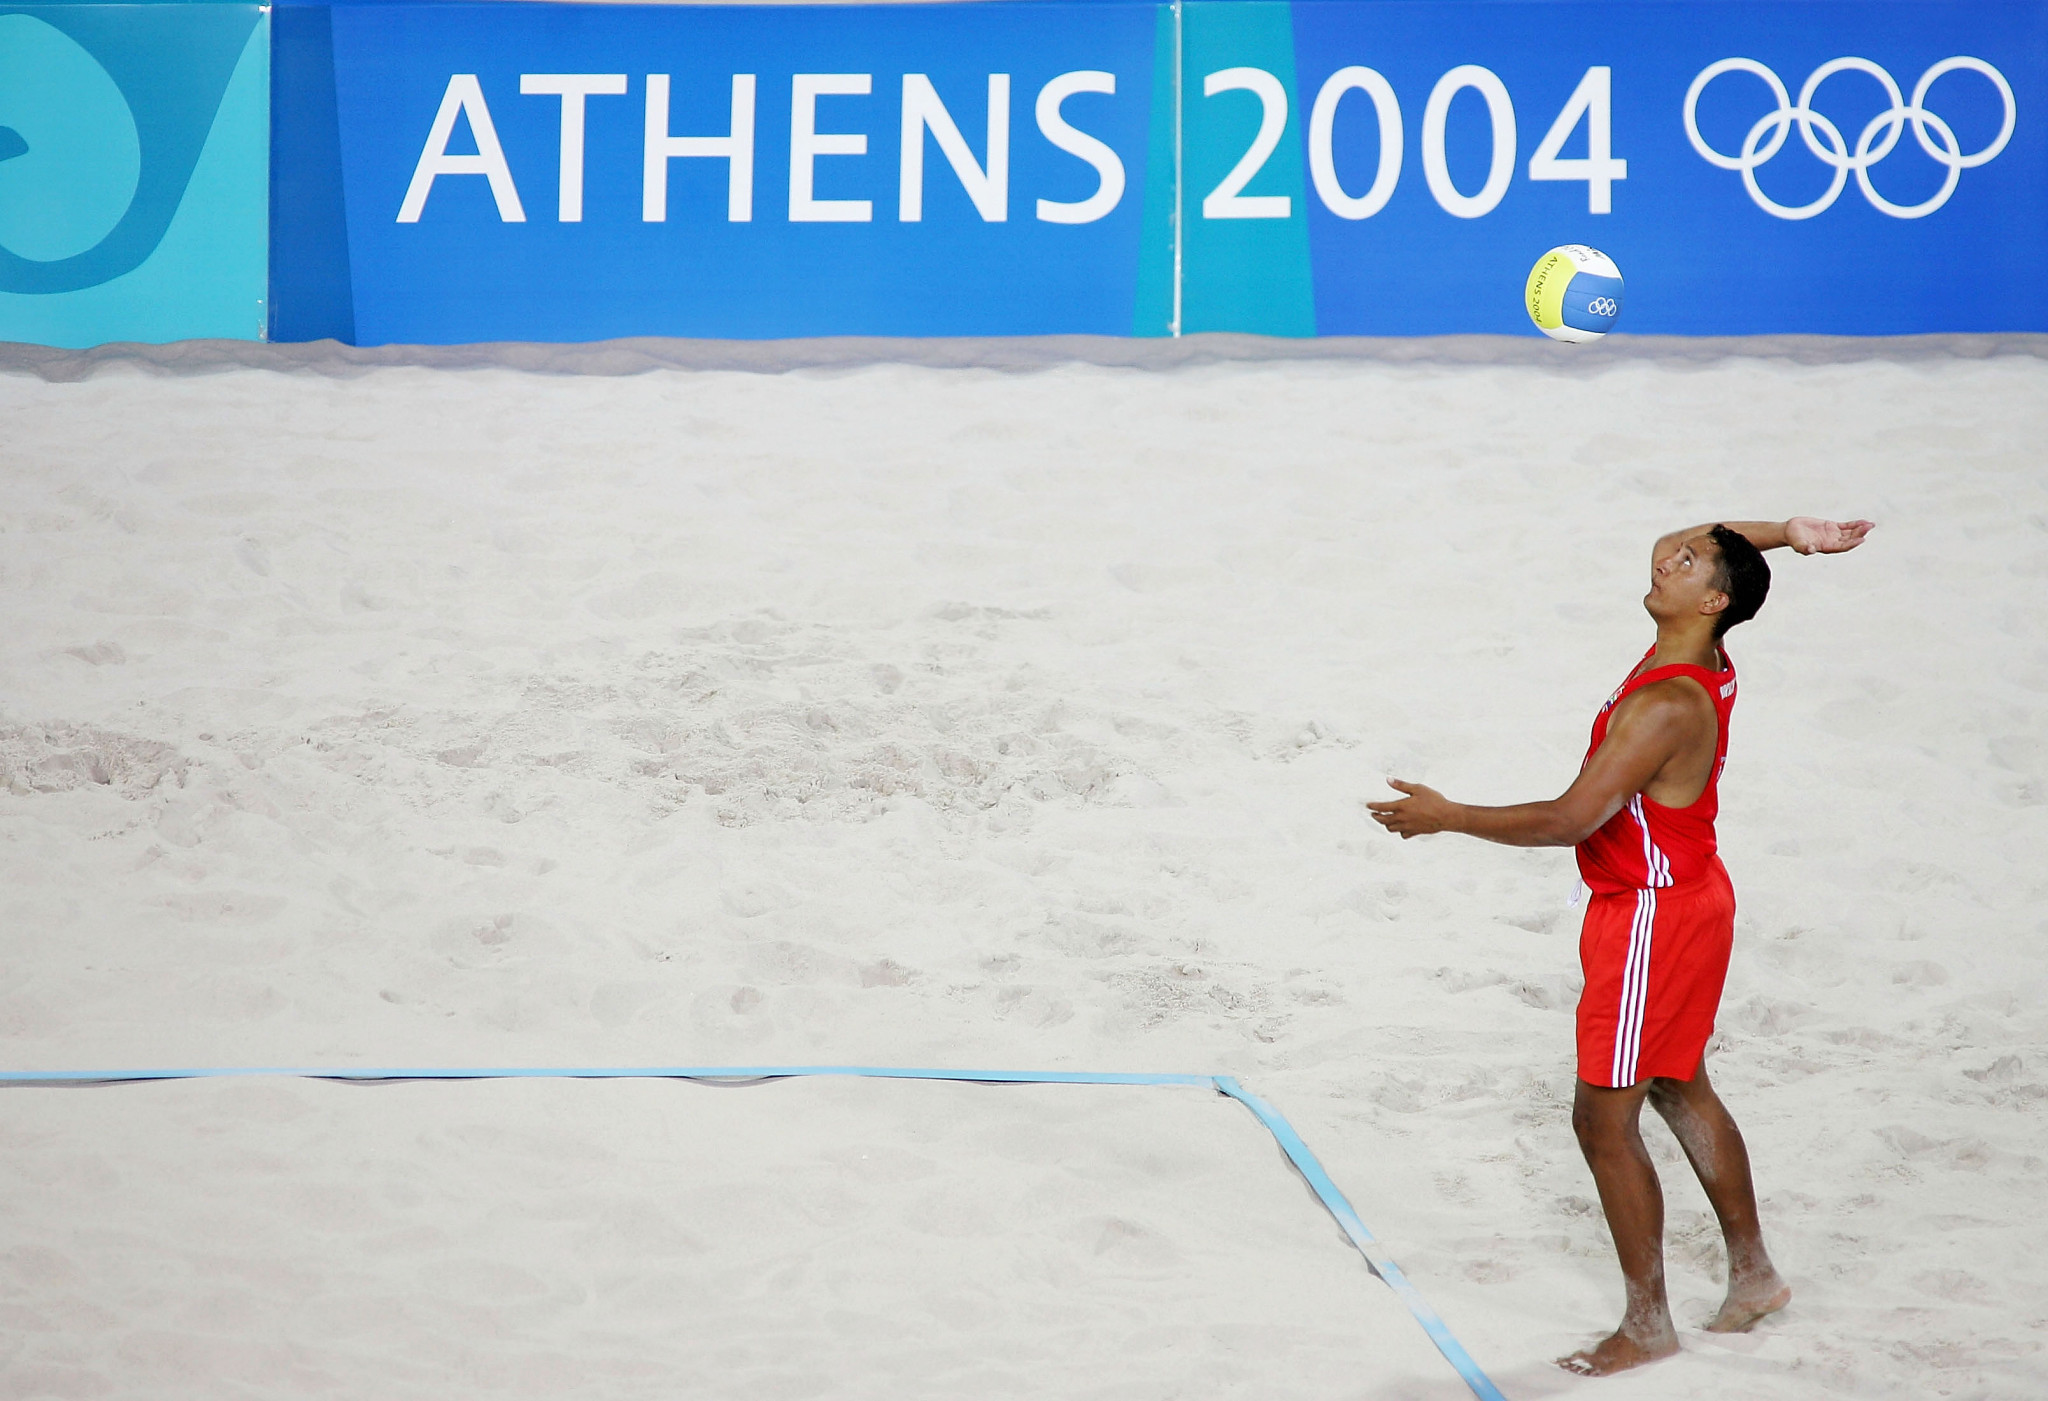 Gershon Rorich represented South Africa at the Athens 2004 Olympics in beach volleyball ©Getty Images